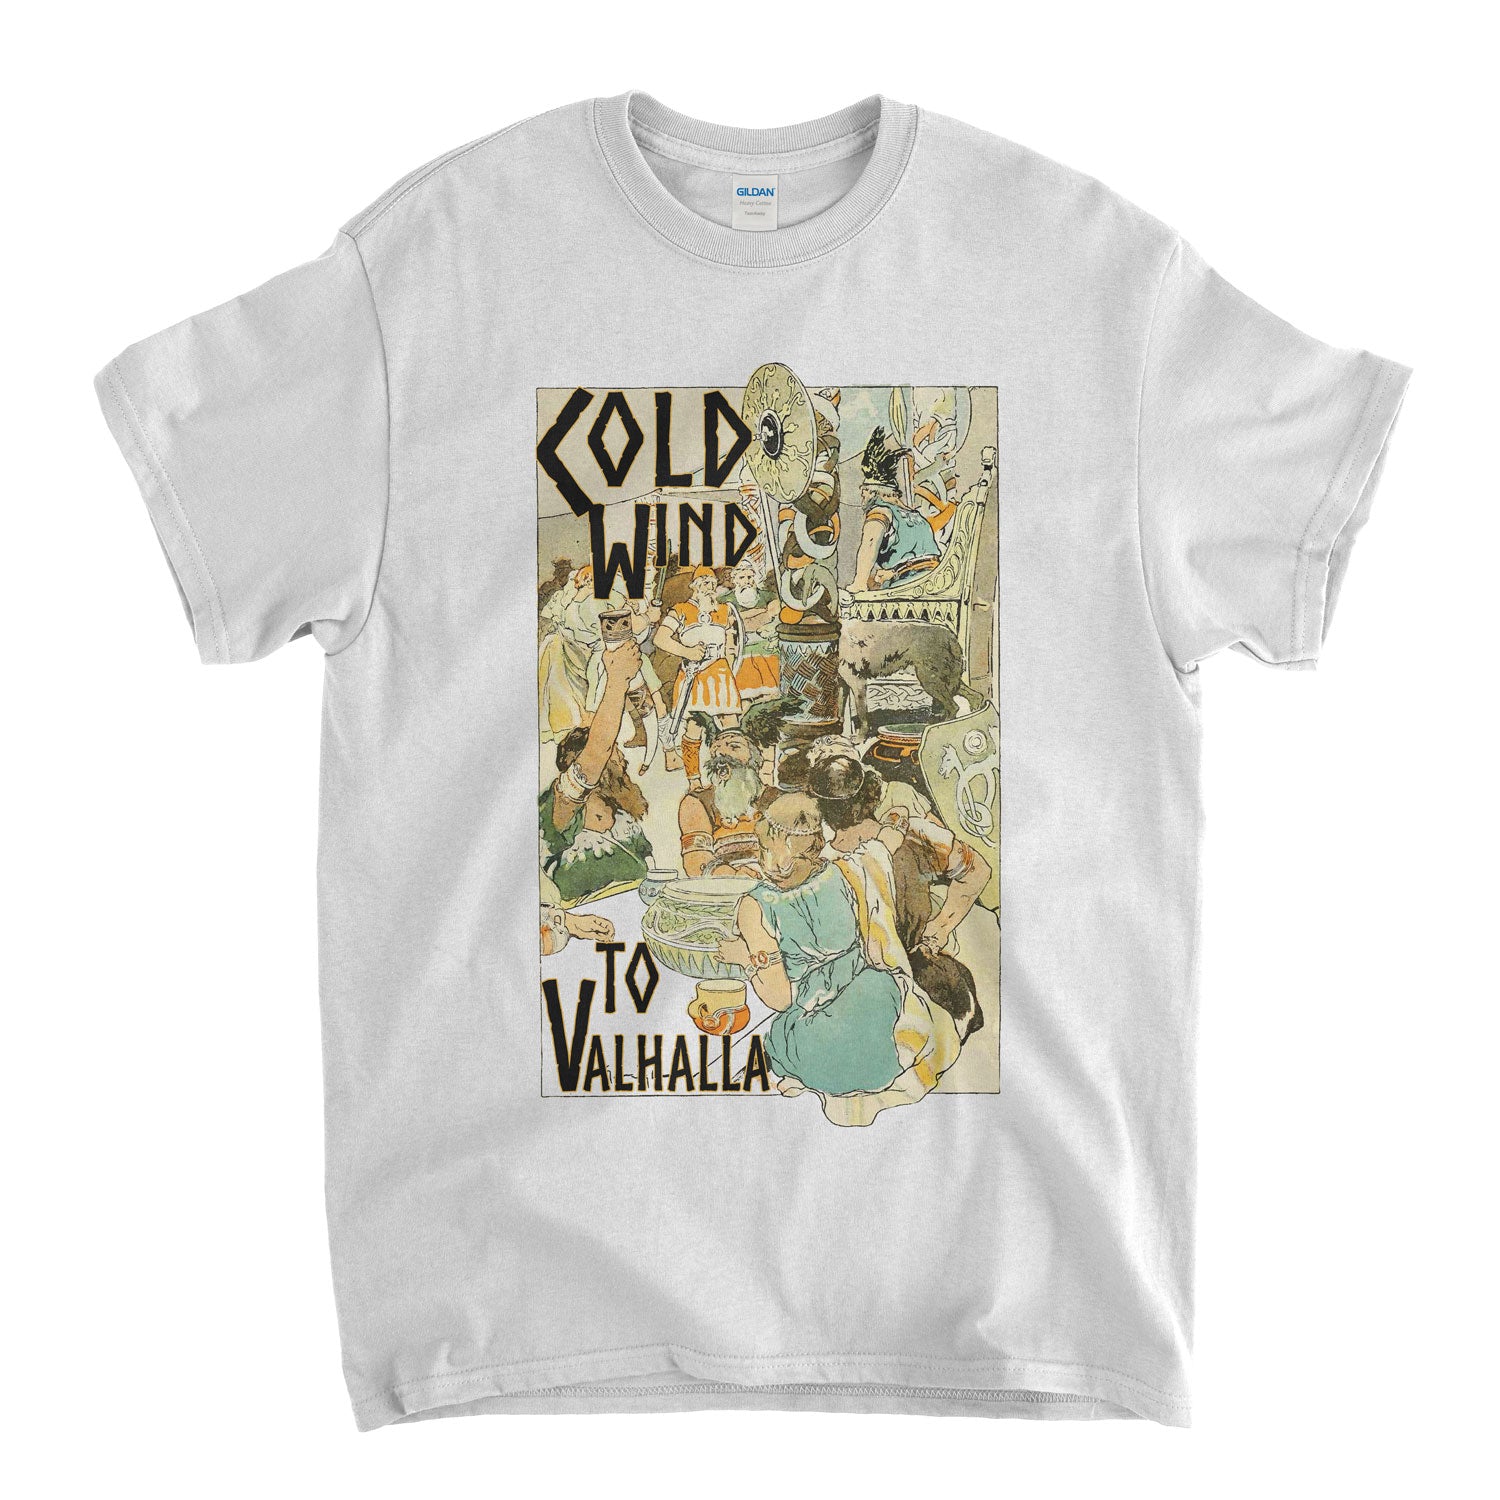 Inspired by Jethro Tull T Shirt - Cold Wind To Valhalla Poster T Shirt